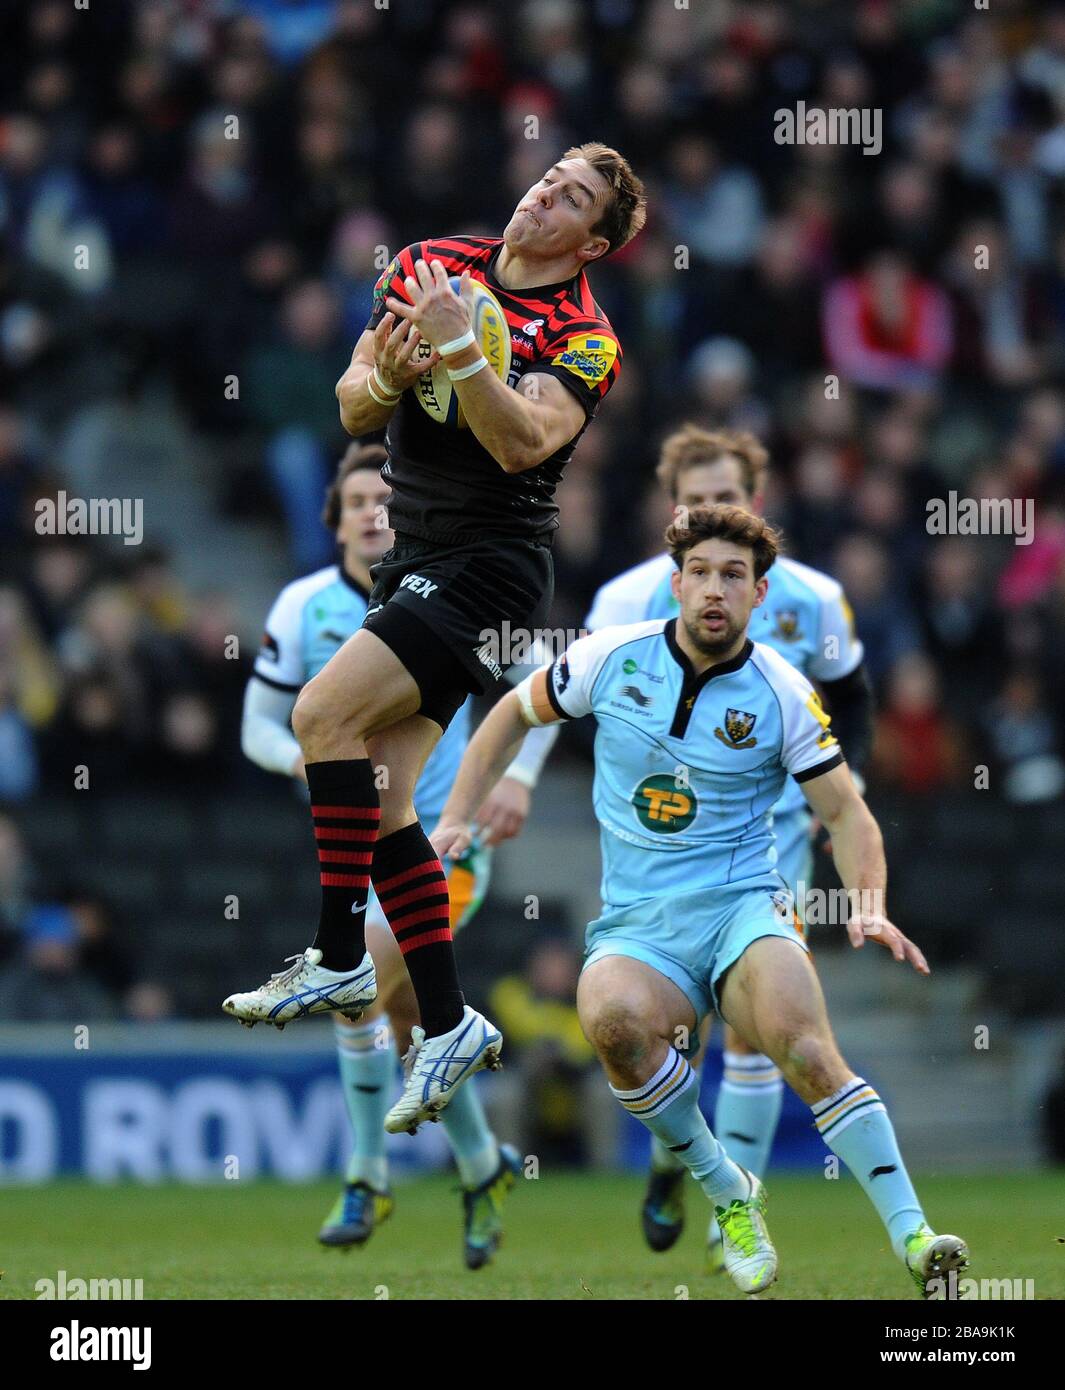 Saracens' Chris Wyles catches a high ball Stock Photo